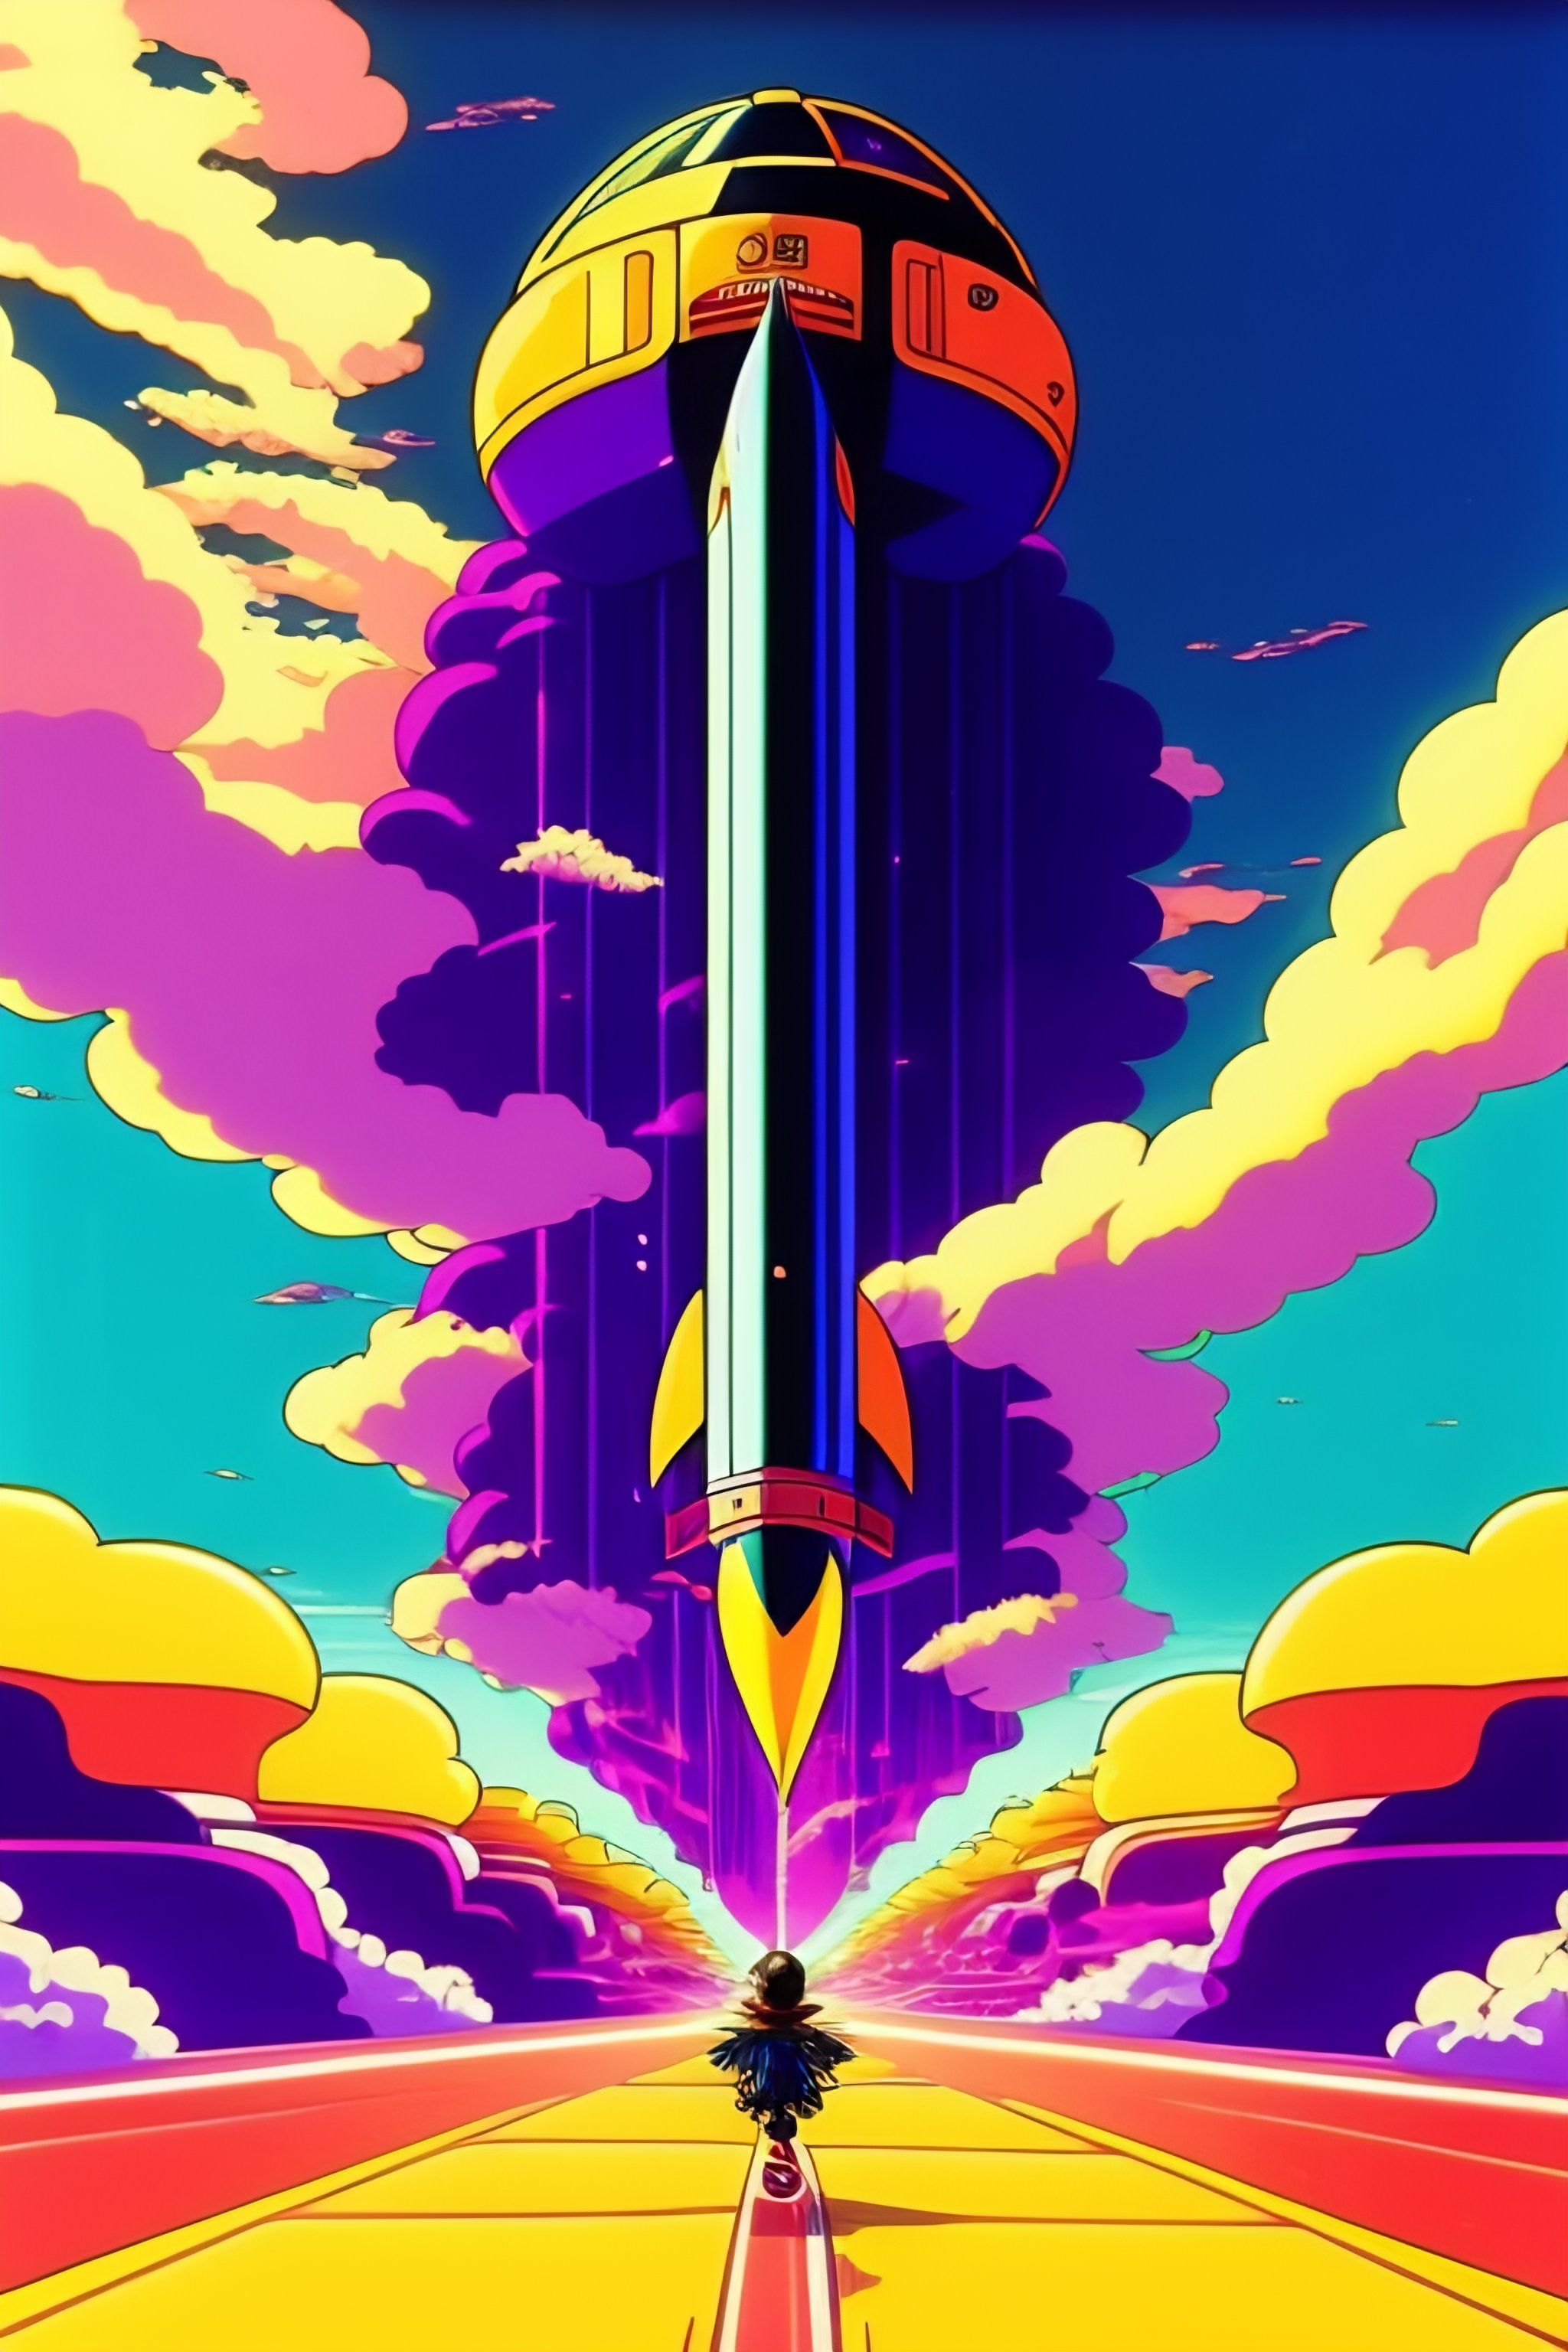 Lexica anime, 90's anime aesthetic. A stunning maximalist shot the protagonist running towards a rocket ship taking off. Aesthetic. One poi